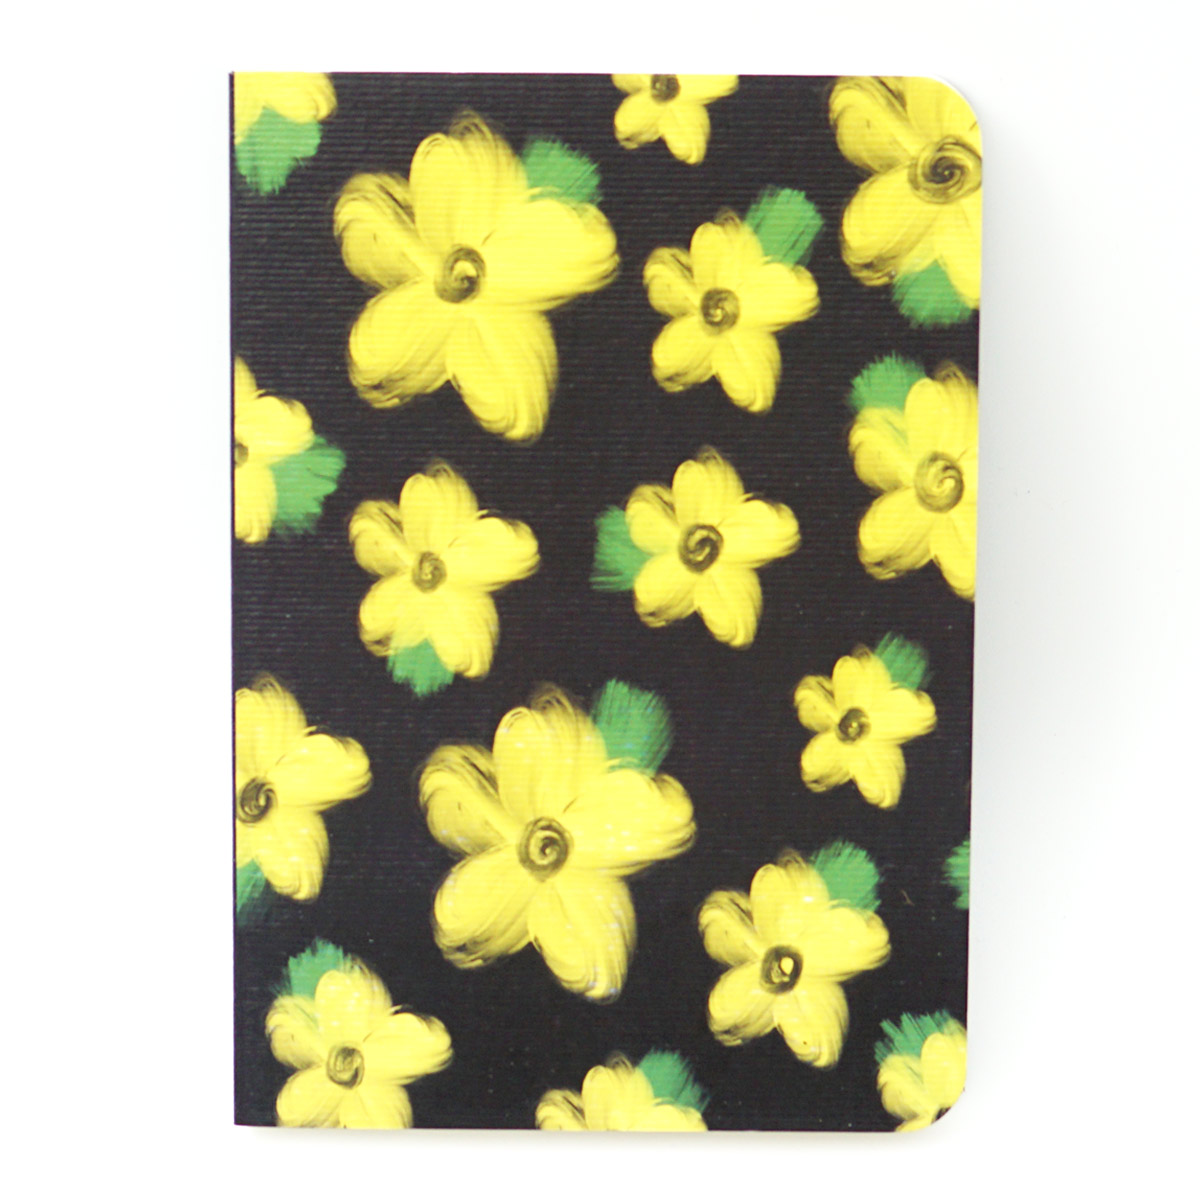 Factor A6 Black Color with Yellow Flower Design Soft Bound Ruled Notebook 100 GSM With 144 Pages SKU 50216